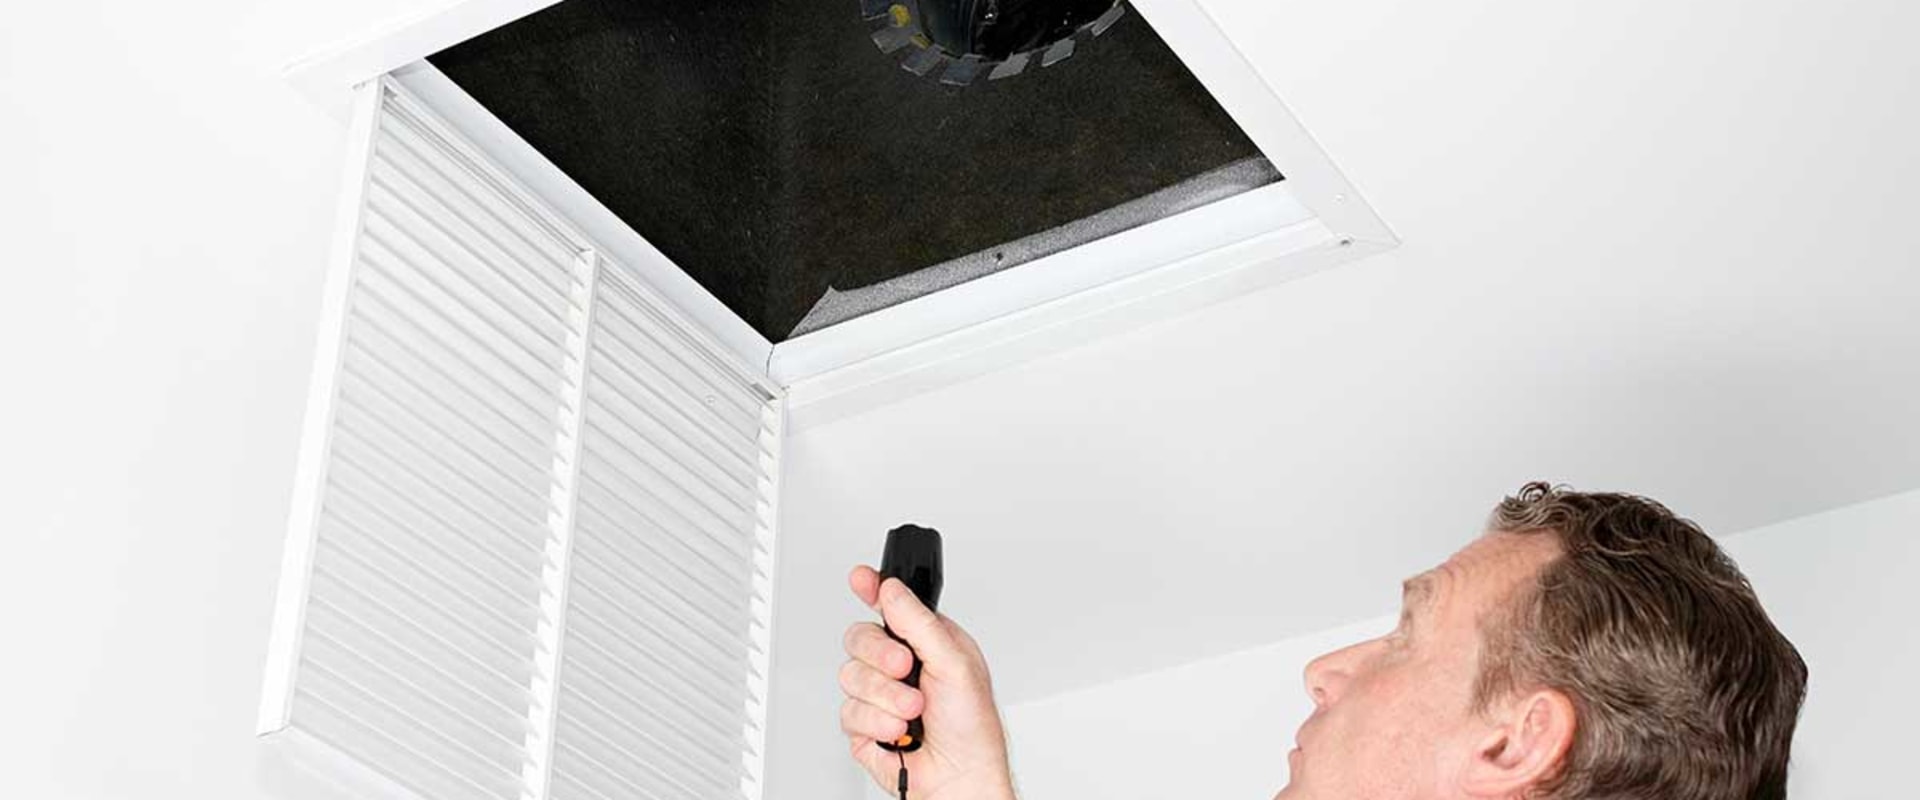 Repairing HVAC Air Ducts in Florida: What You Need to Know